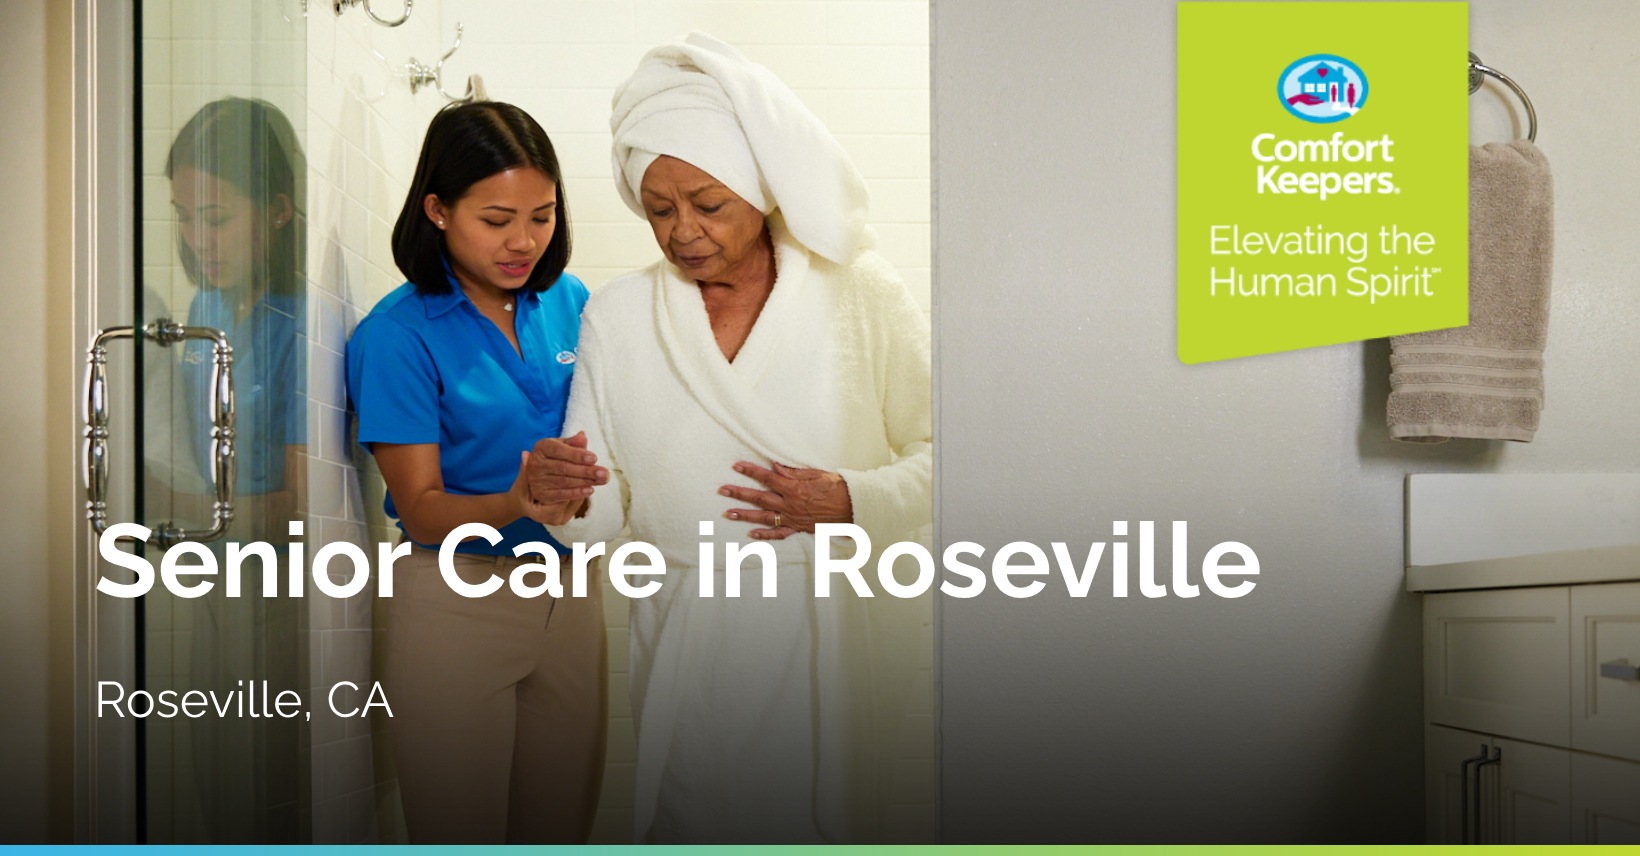 How Home Care Supports Our Basic Human Needs